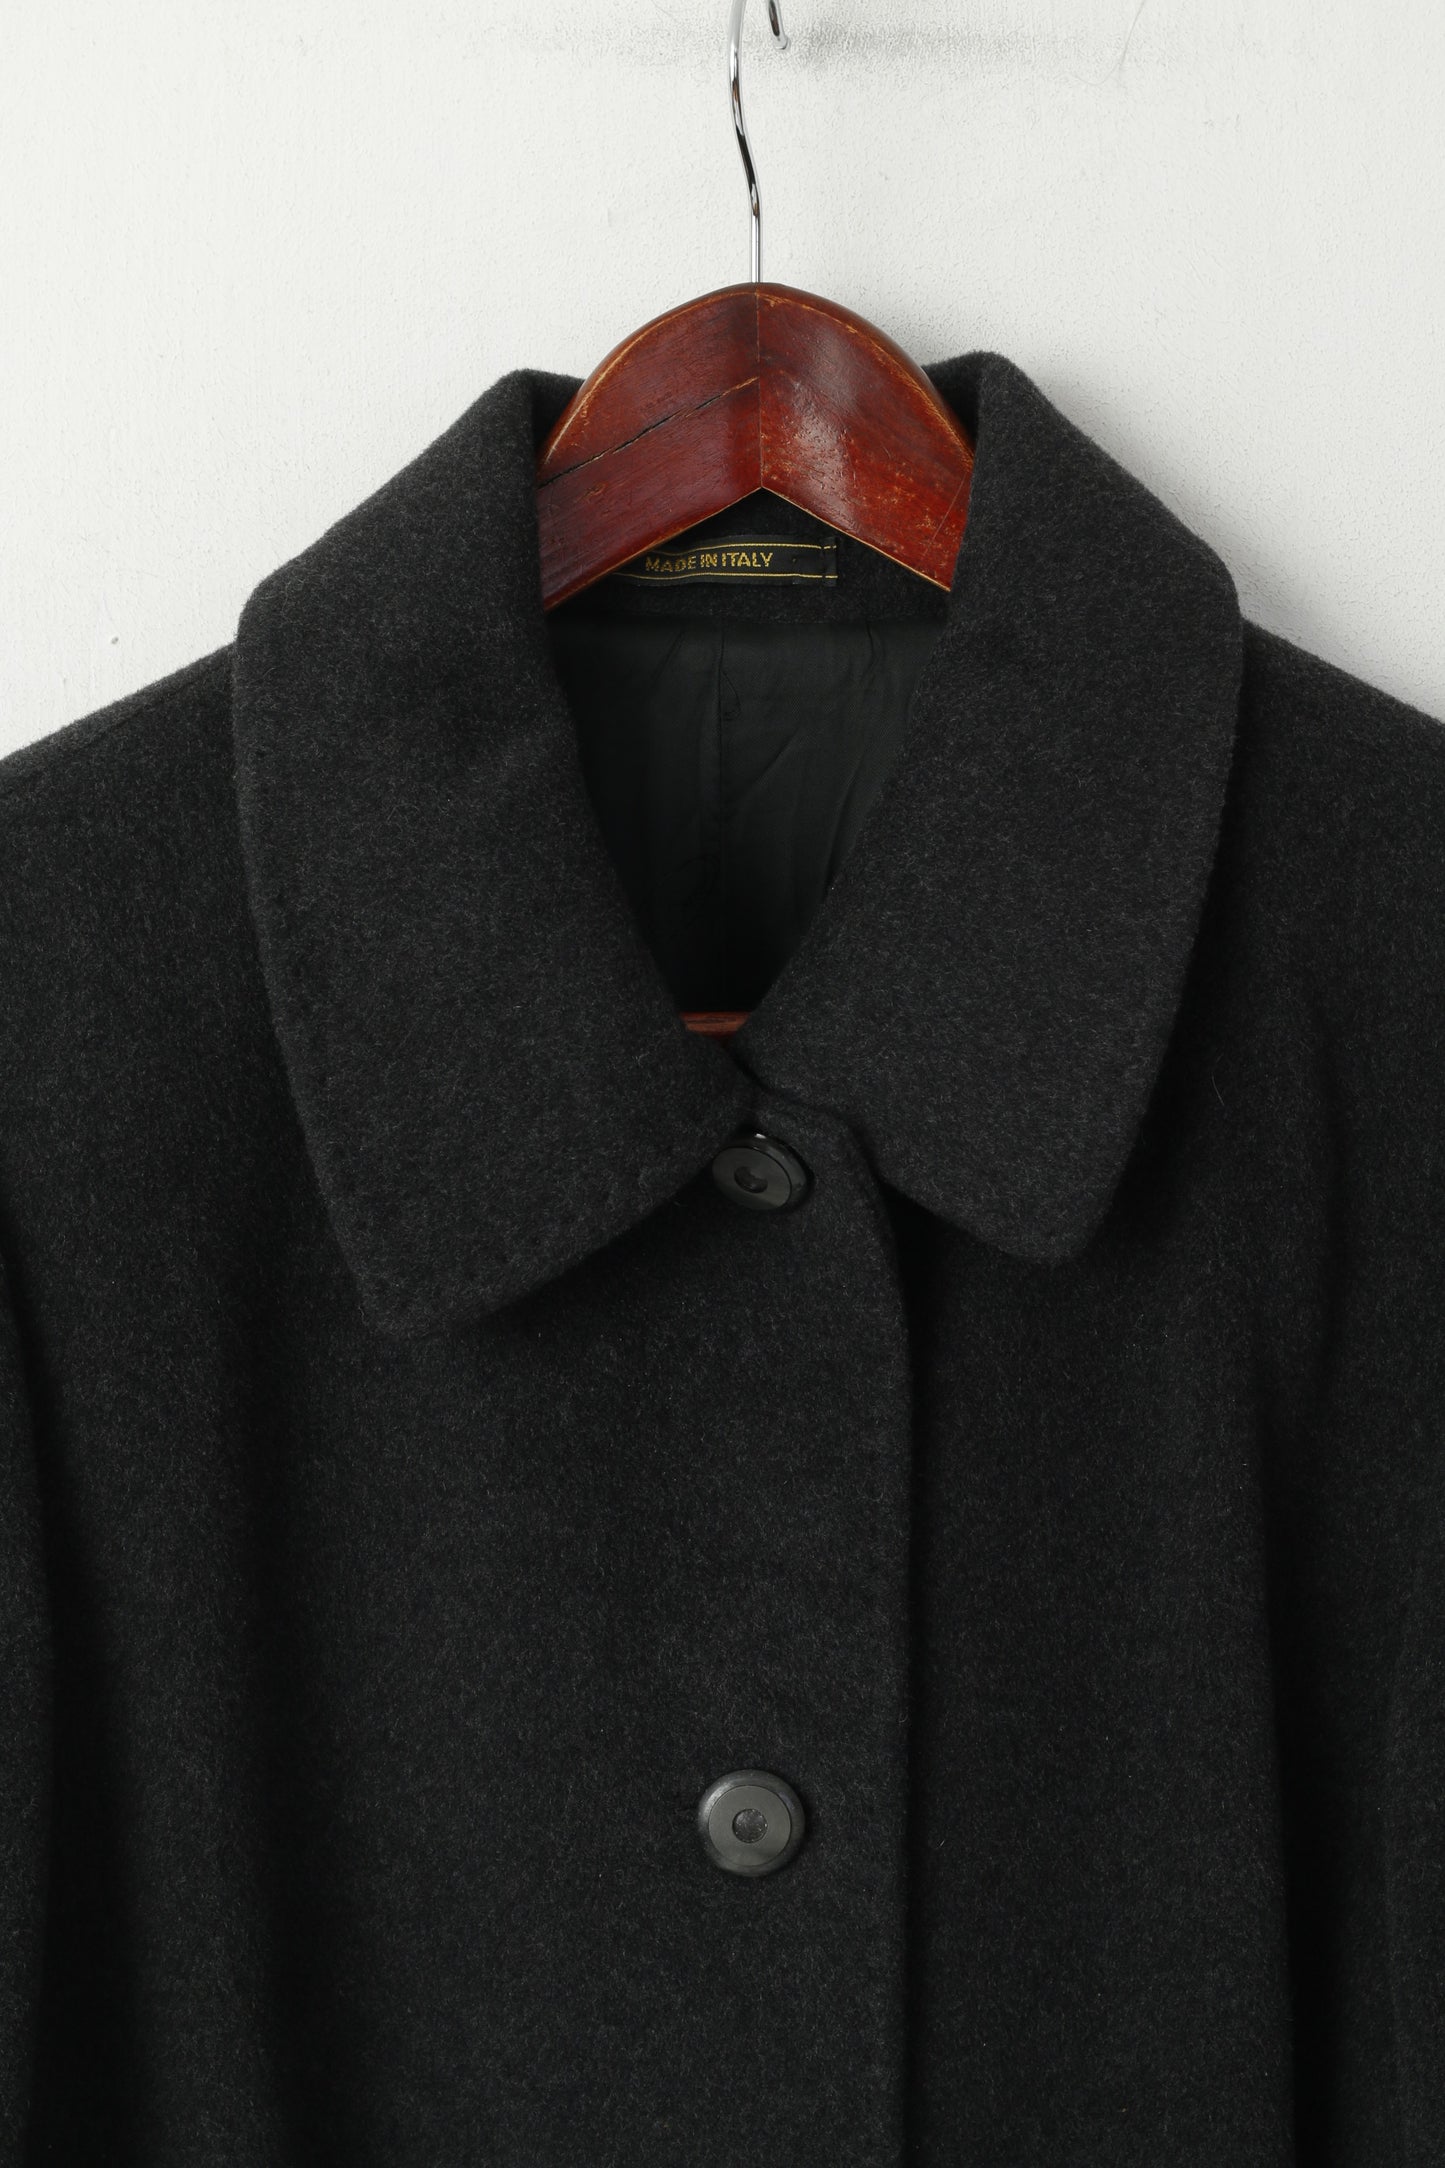 Lana Superfine Women 44 M Coat Charcoal Wool Made in Italy Soft Belted Single Breasted